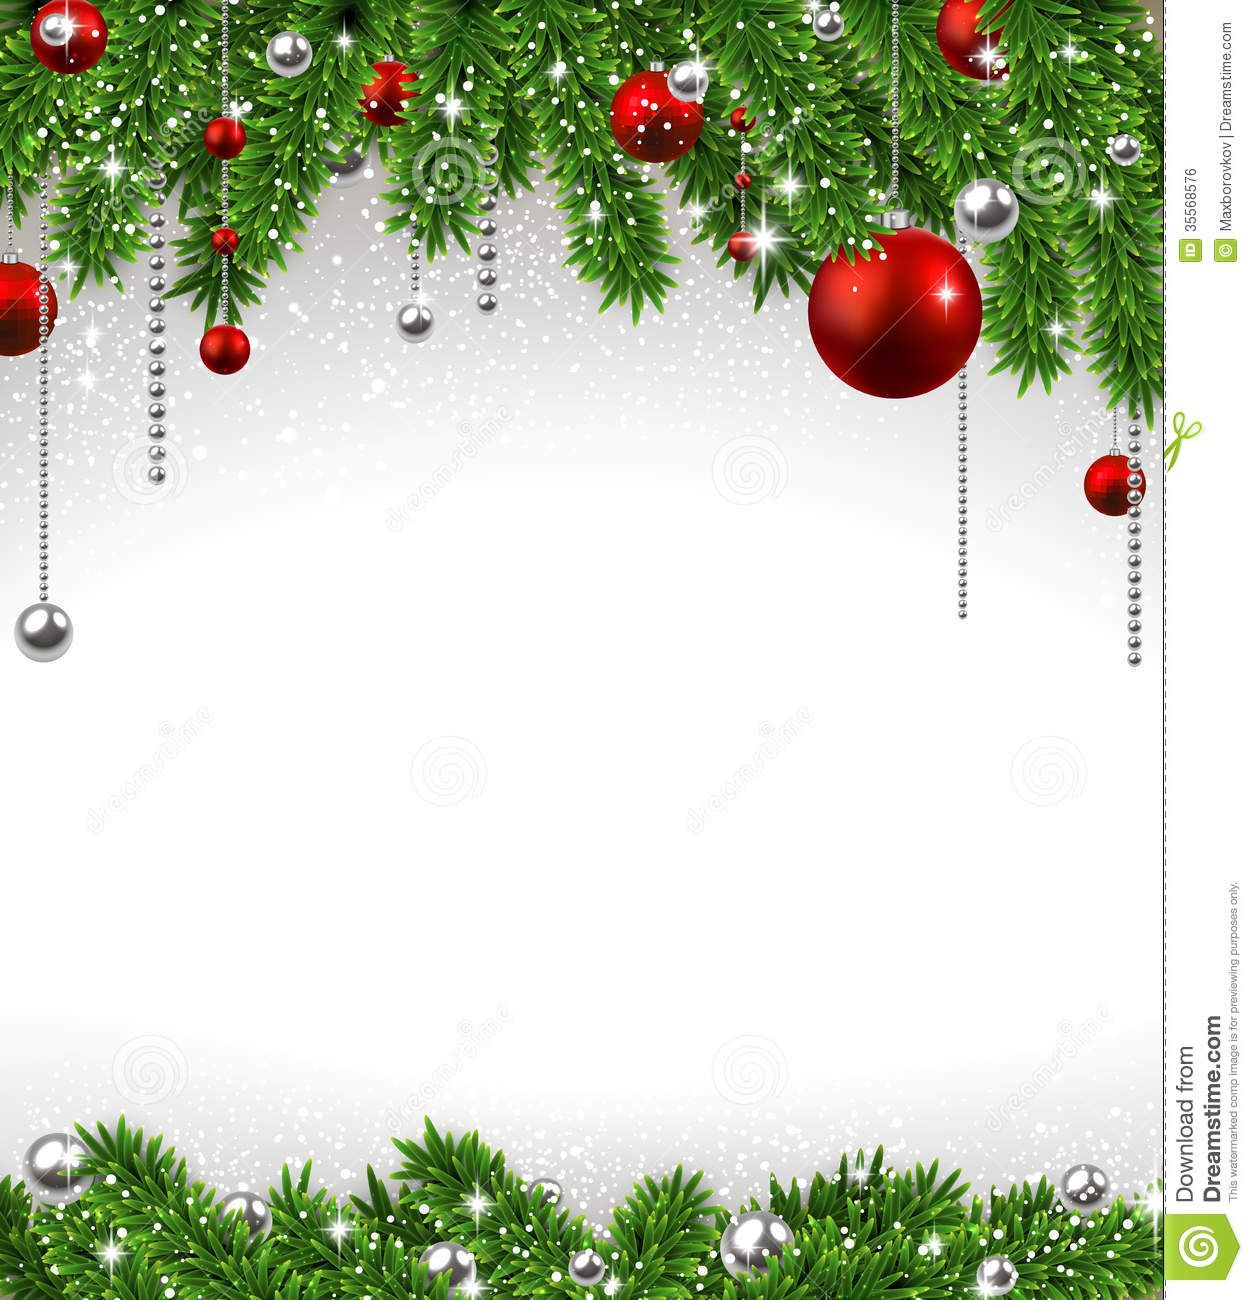 Christmas Background With Fir Branches And Balls Royalty